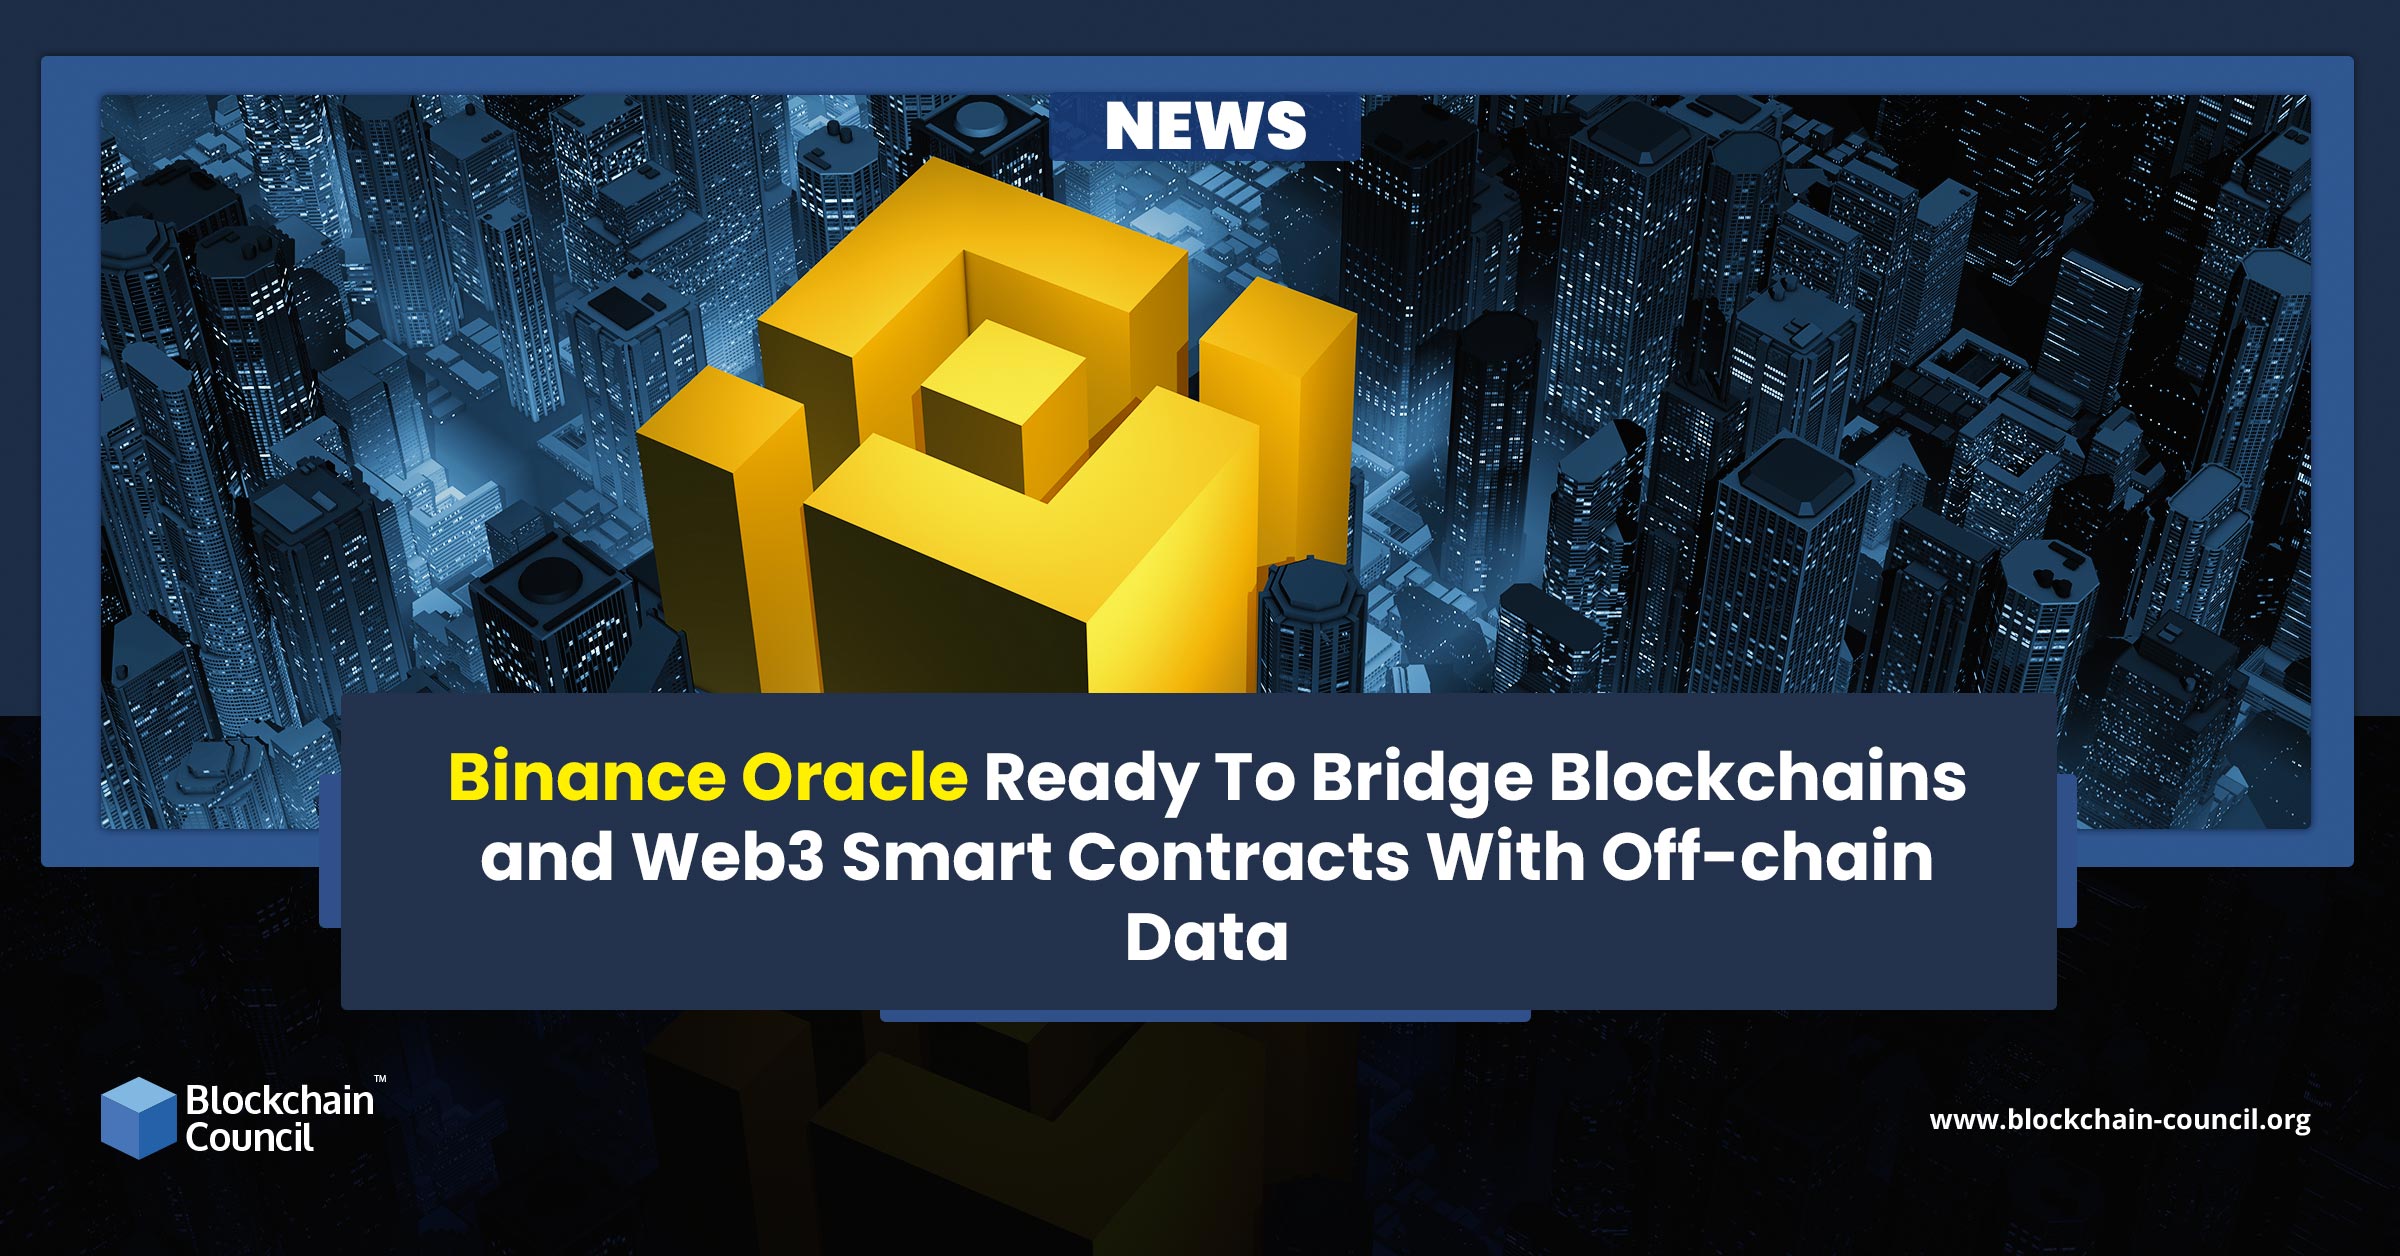 Binance Oracle Ready To Bridge Blockchains and Web3 Smart Contracts With Off-chain Data